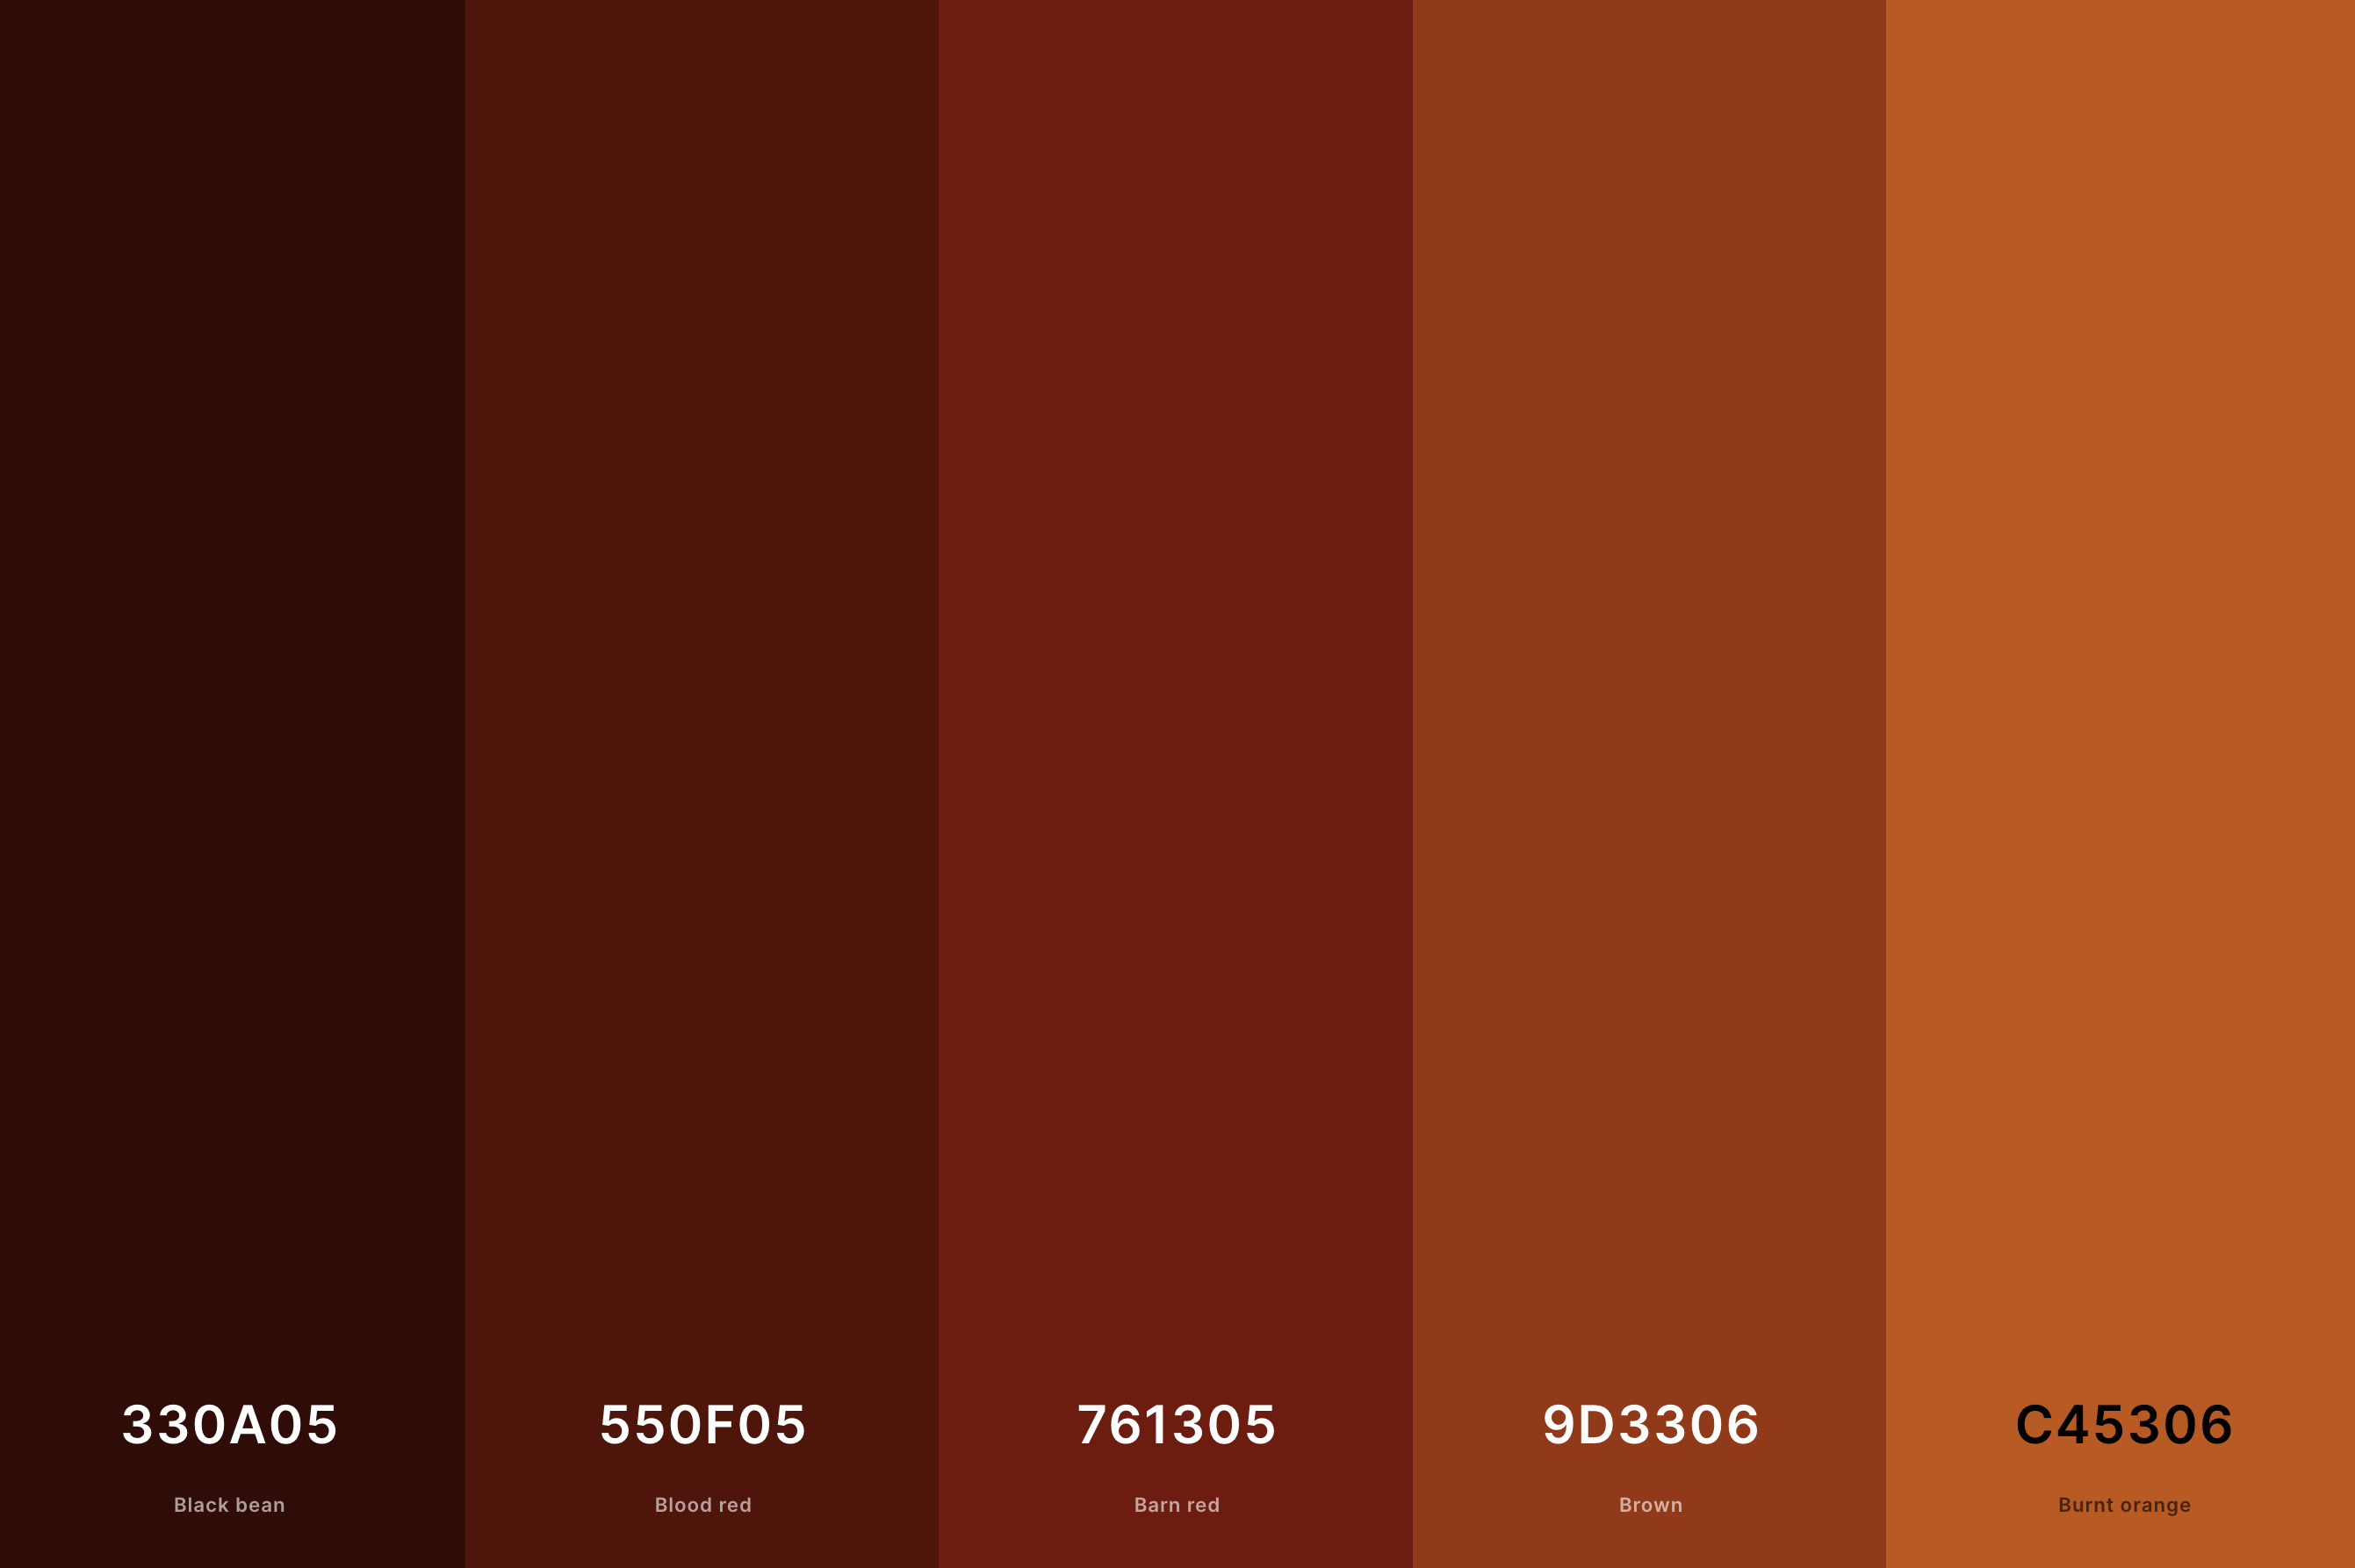 https://cdn.shopify.com/s/files/1/1038/1798/files/17._Dark_Terracotta_Color_Palette_Color_Palette_with_Black_Bean_Hex_330A05_Blood_Red_Hex_550F05_Barn_Red_Hex_761305_Brown_Hex_9D3306_Burnt_Orange_Hex_C45306_Color_Palette_with_Hex_Cod.png?v=1707219133